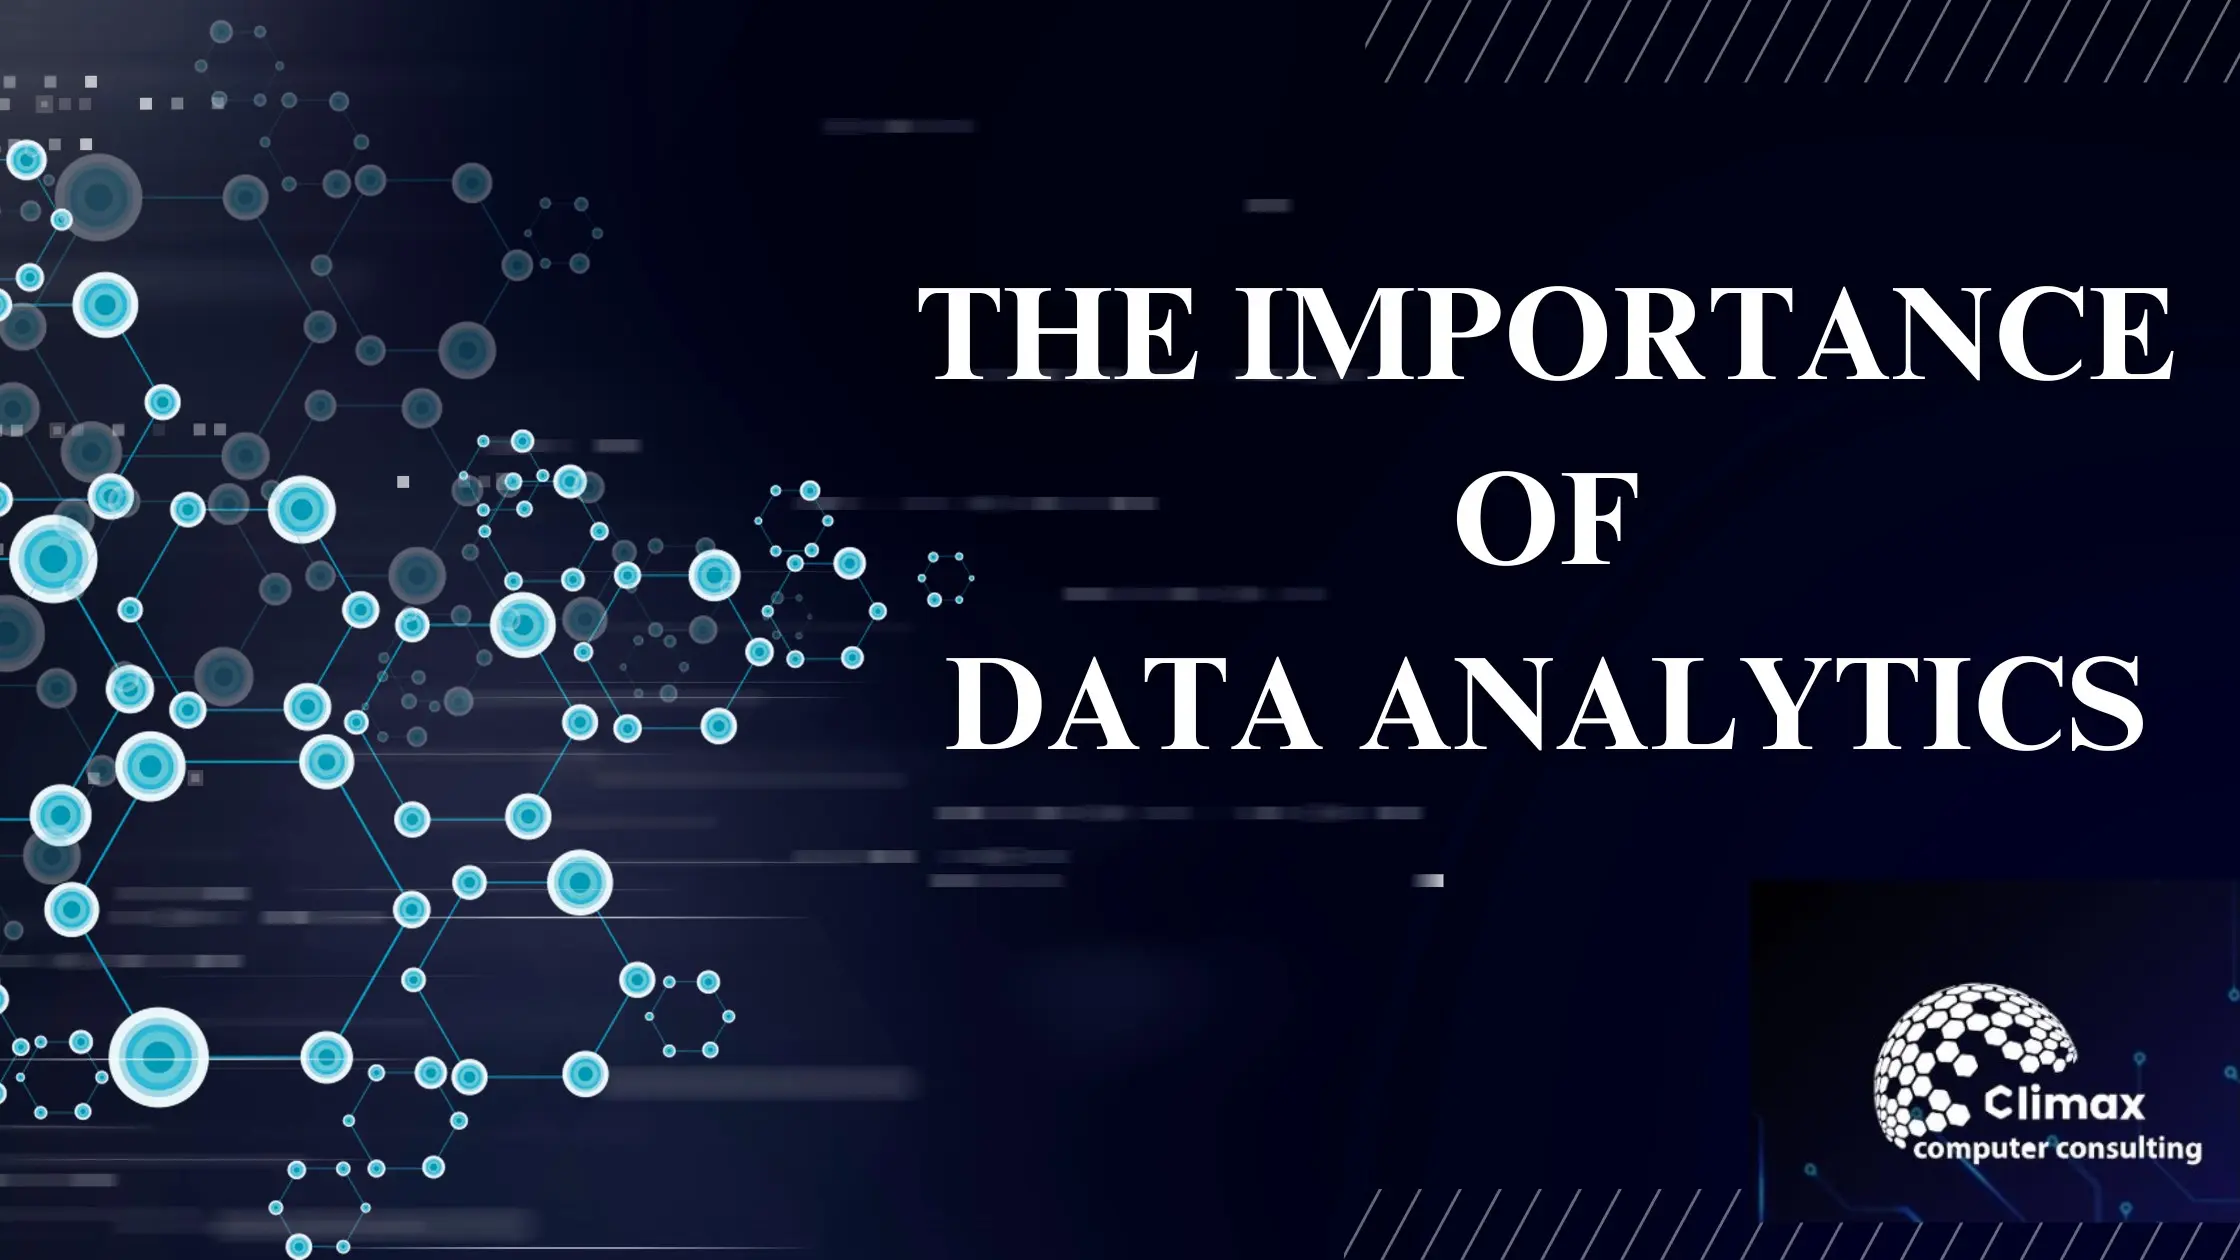 Data analytics is crucial for several reasons